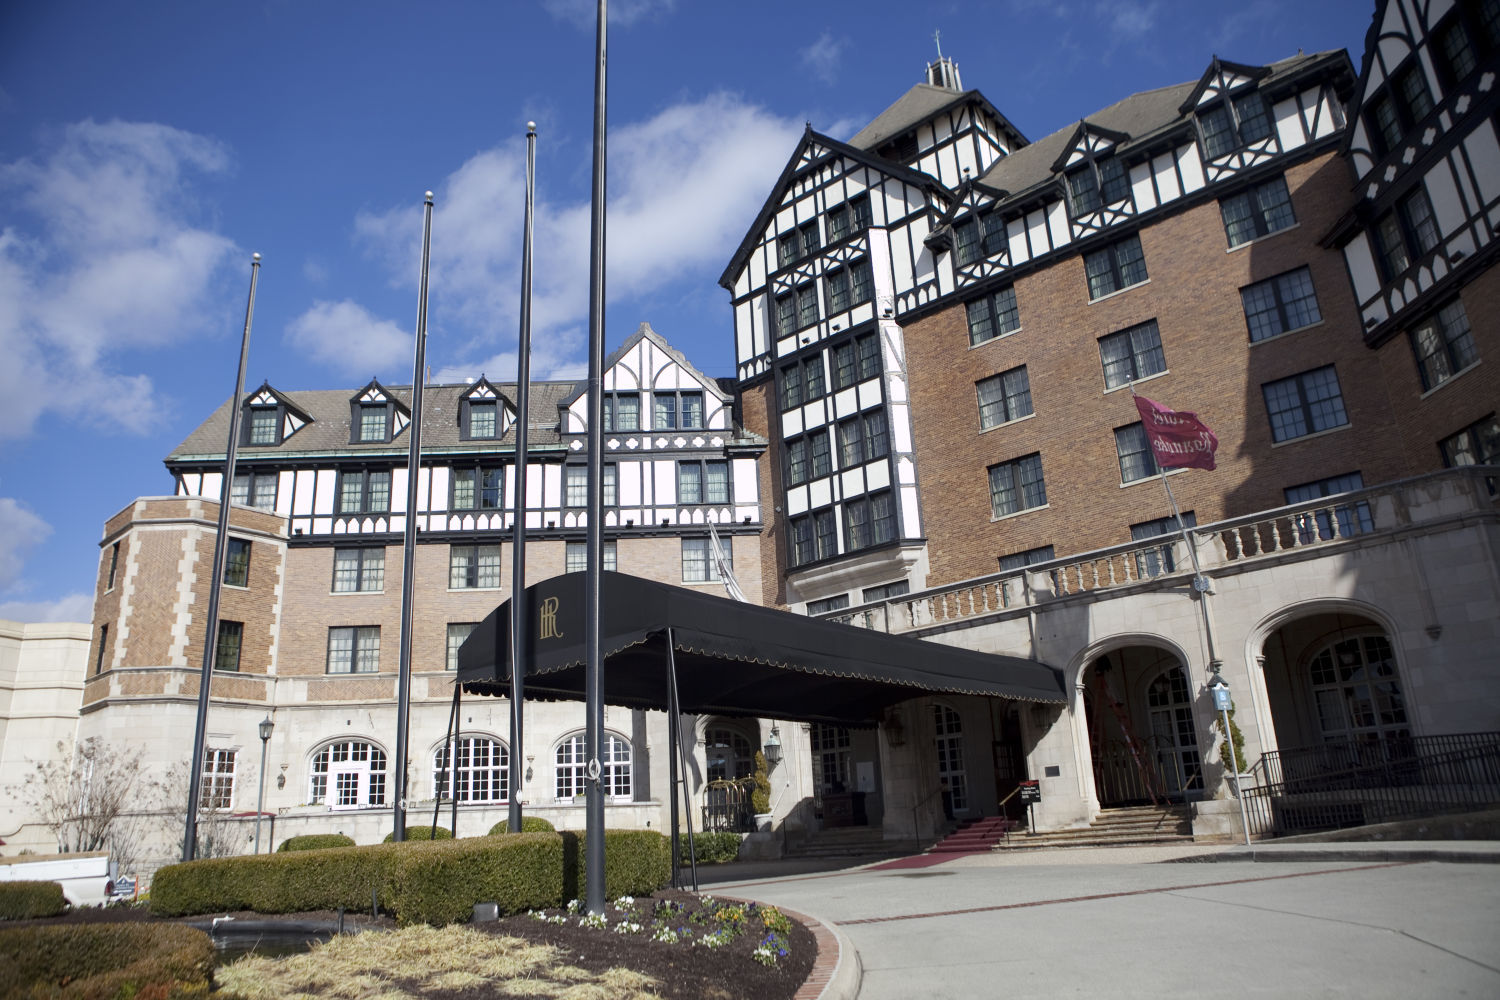 Hotel Roanoke removes Lee portrait, citing current events